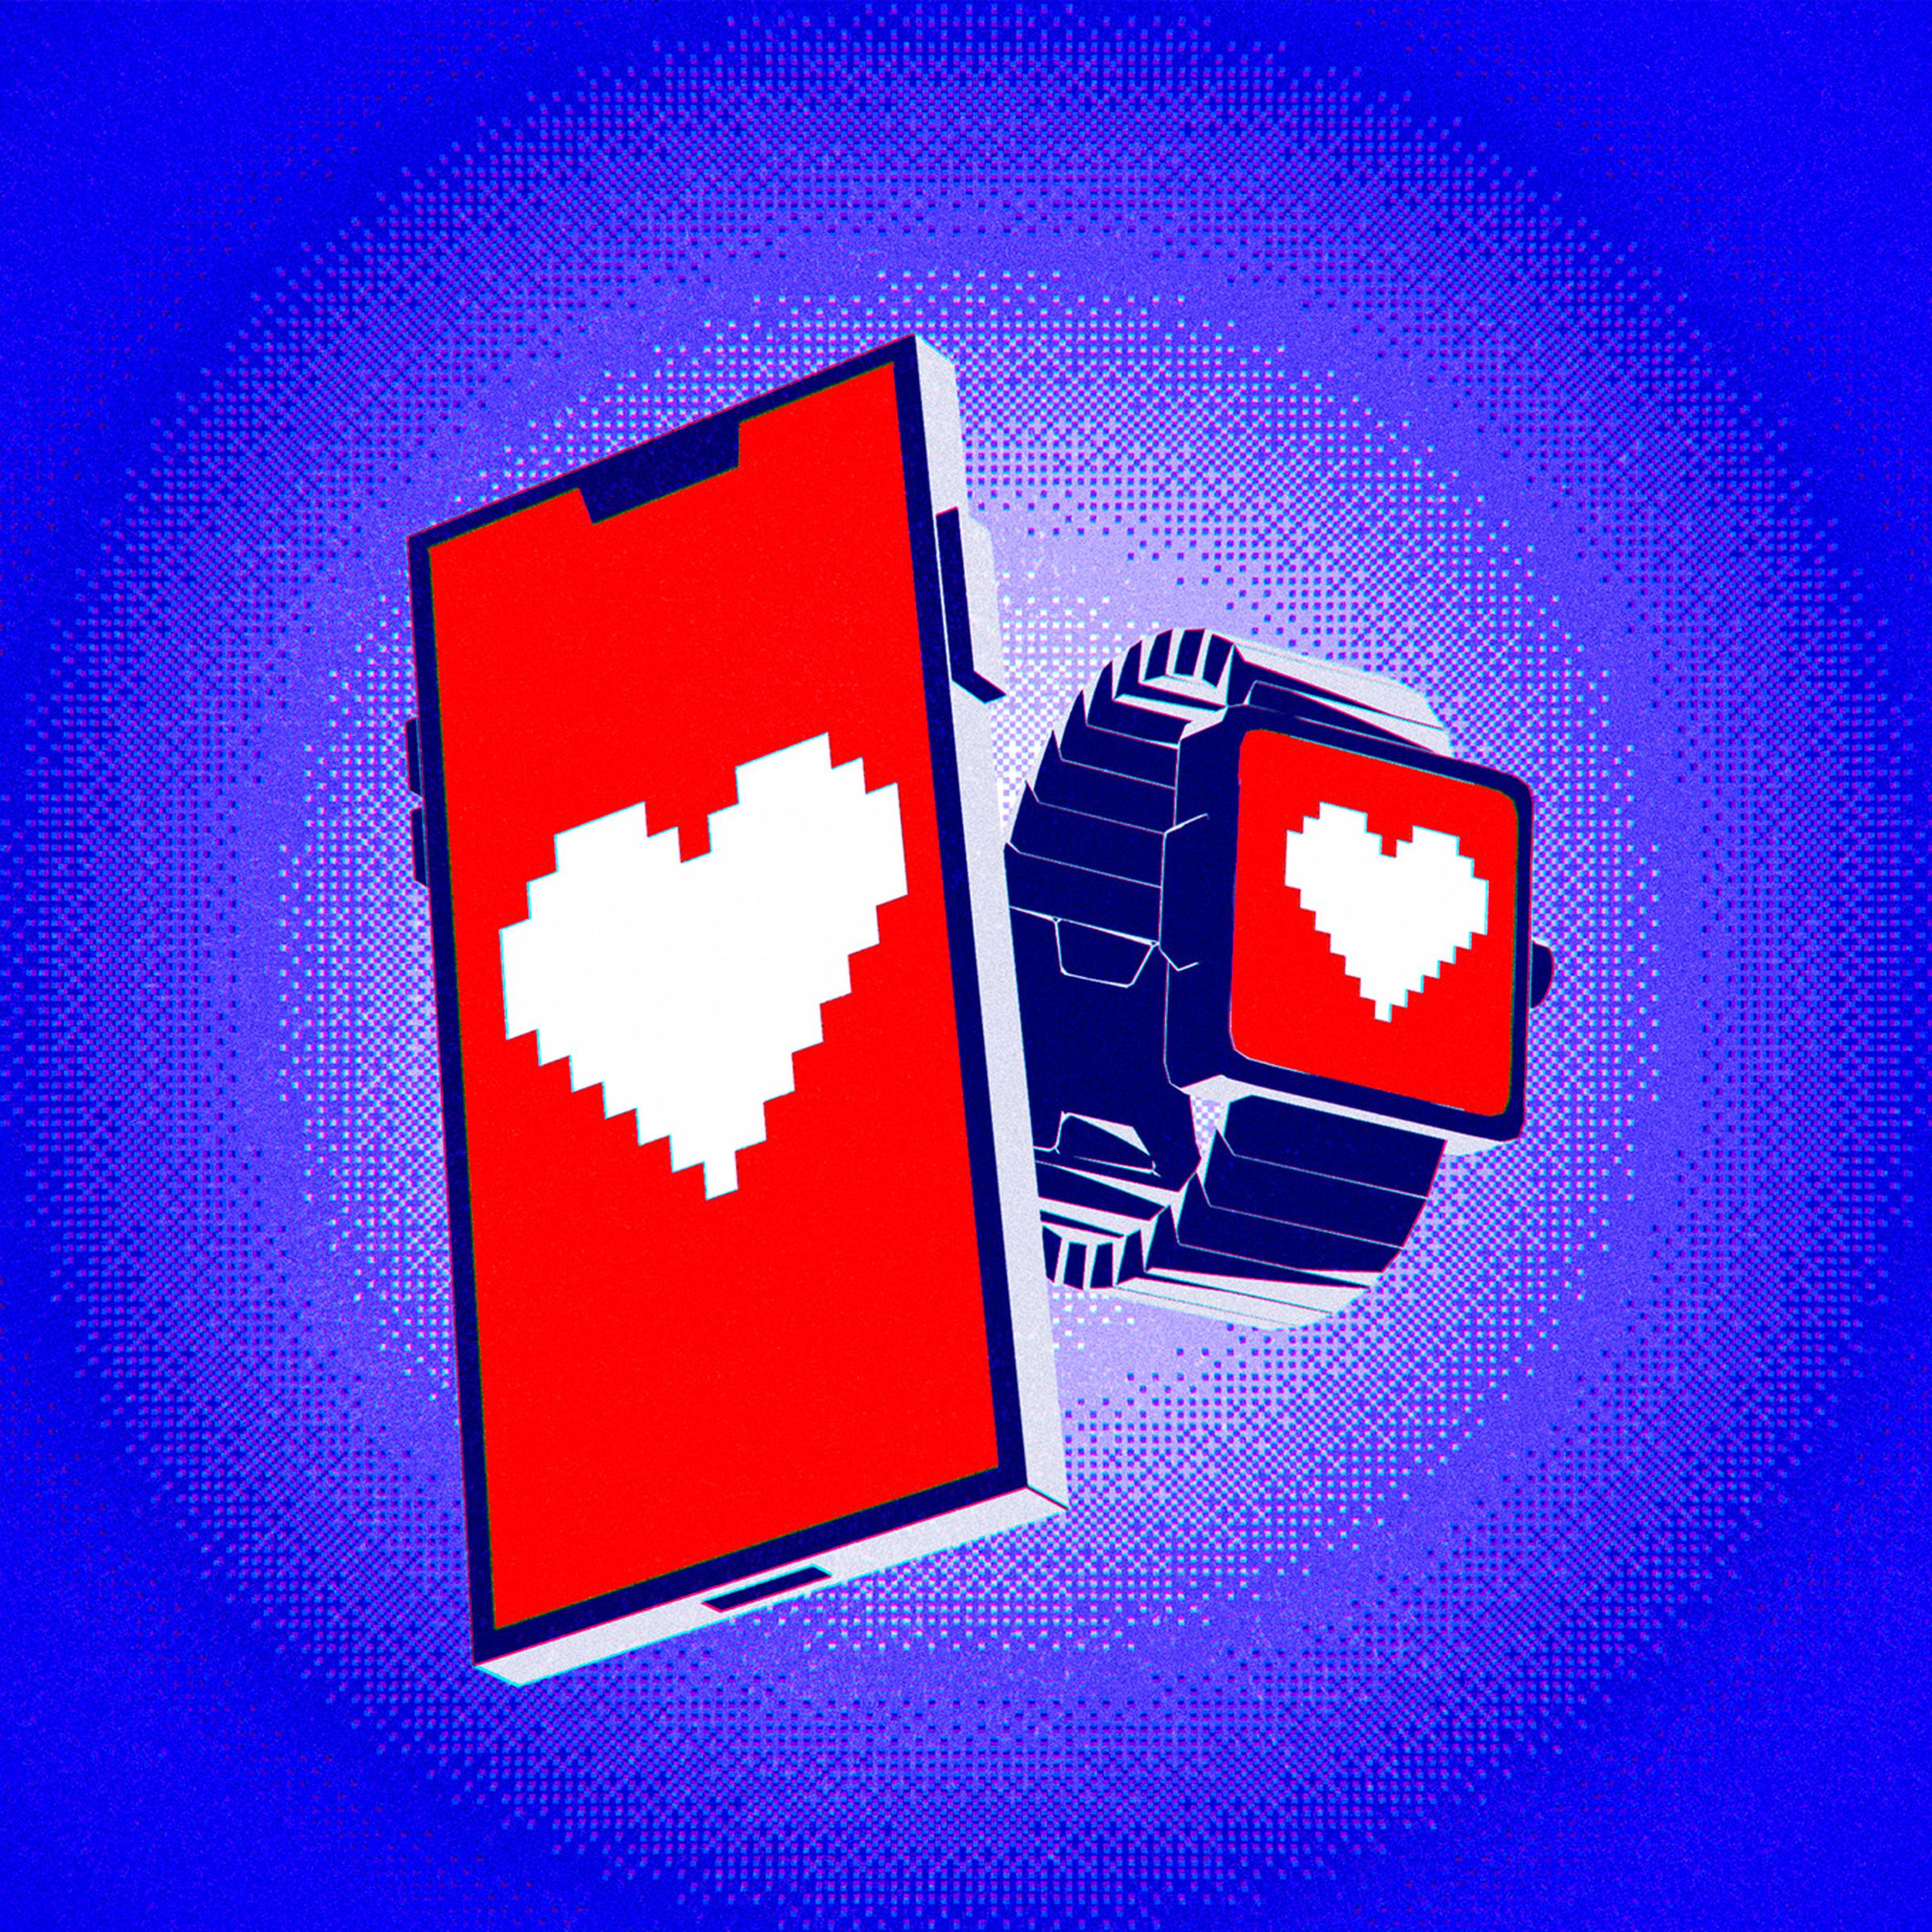 An illustration of an image of a phone and watch, with hearts on them.